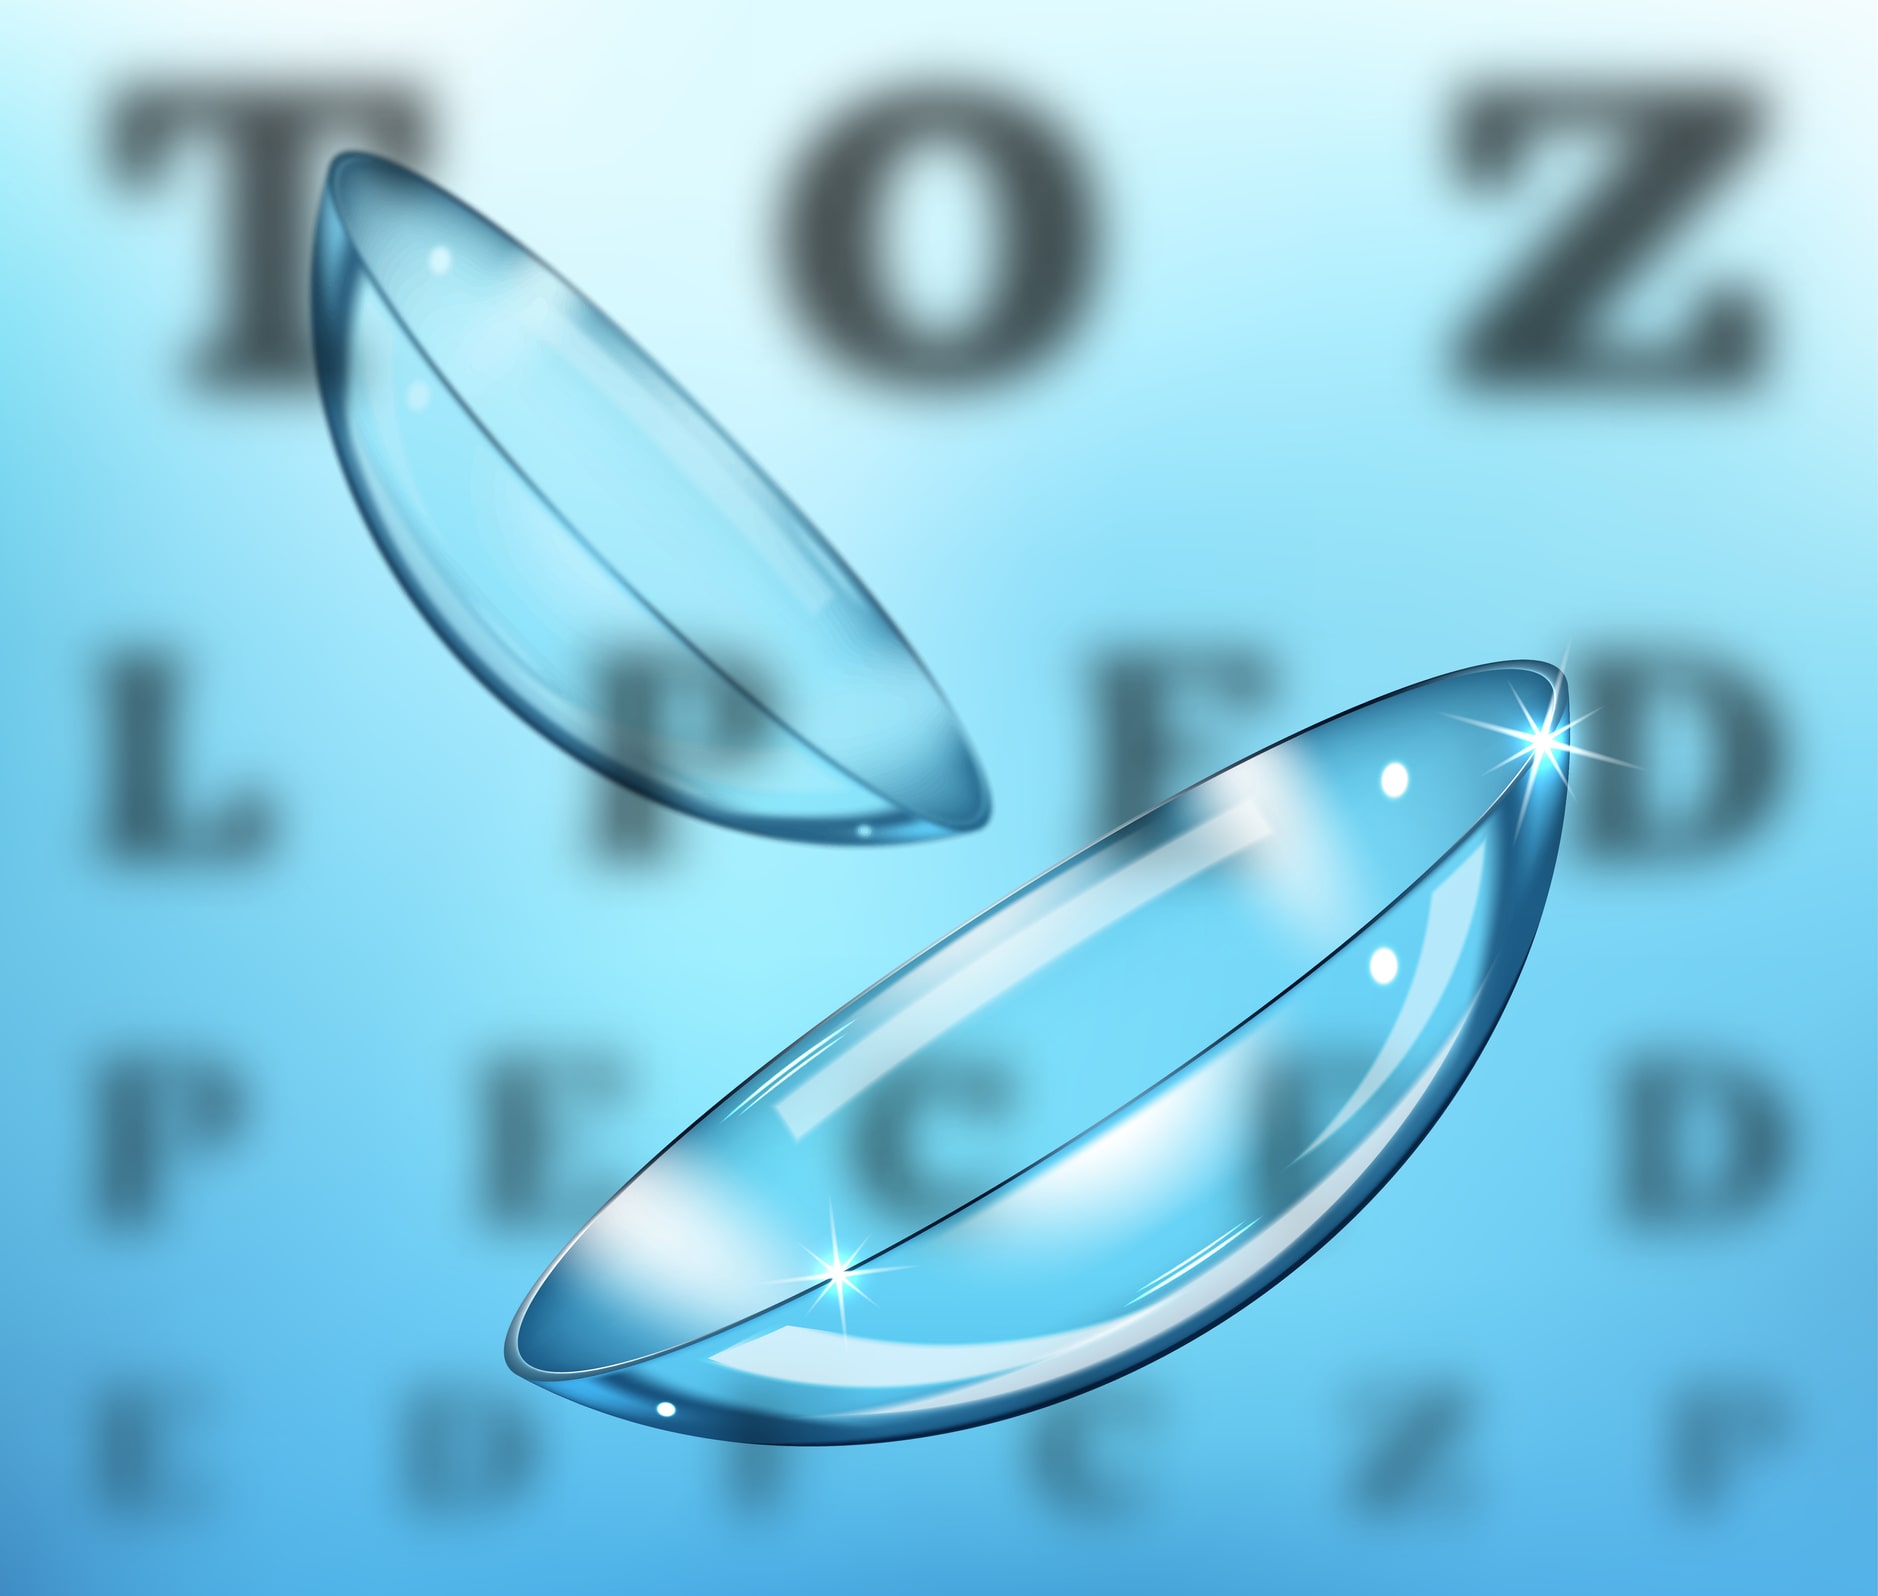 Incorporating the Correct OrthoK Lens Designs, Fitting Tools, and Labs Into Your Practice